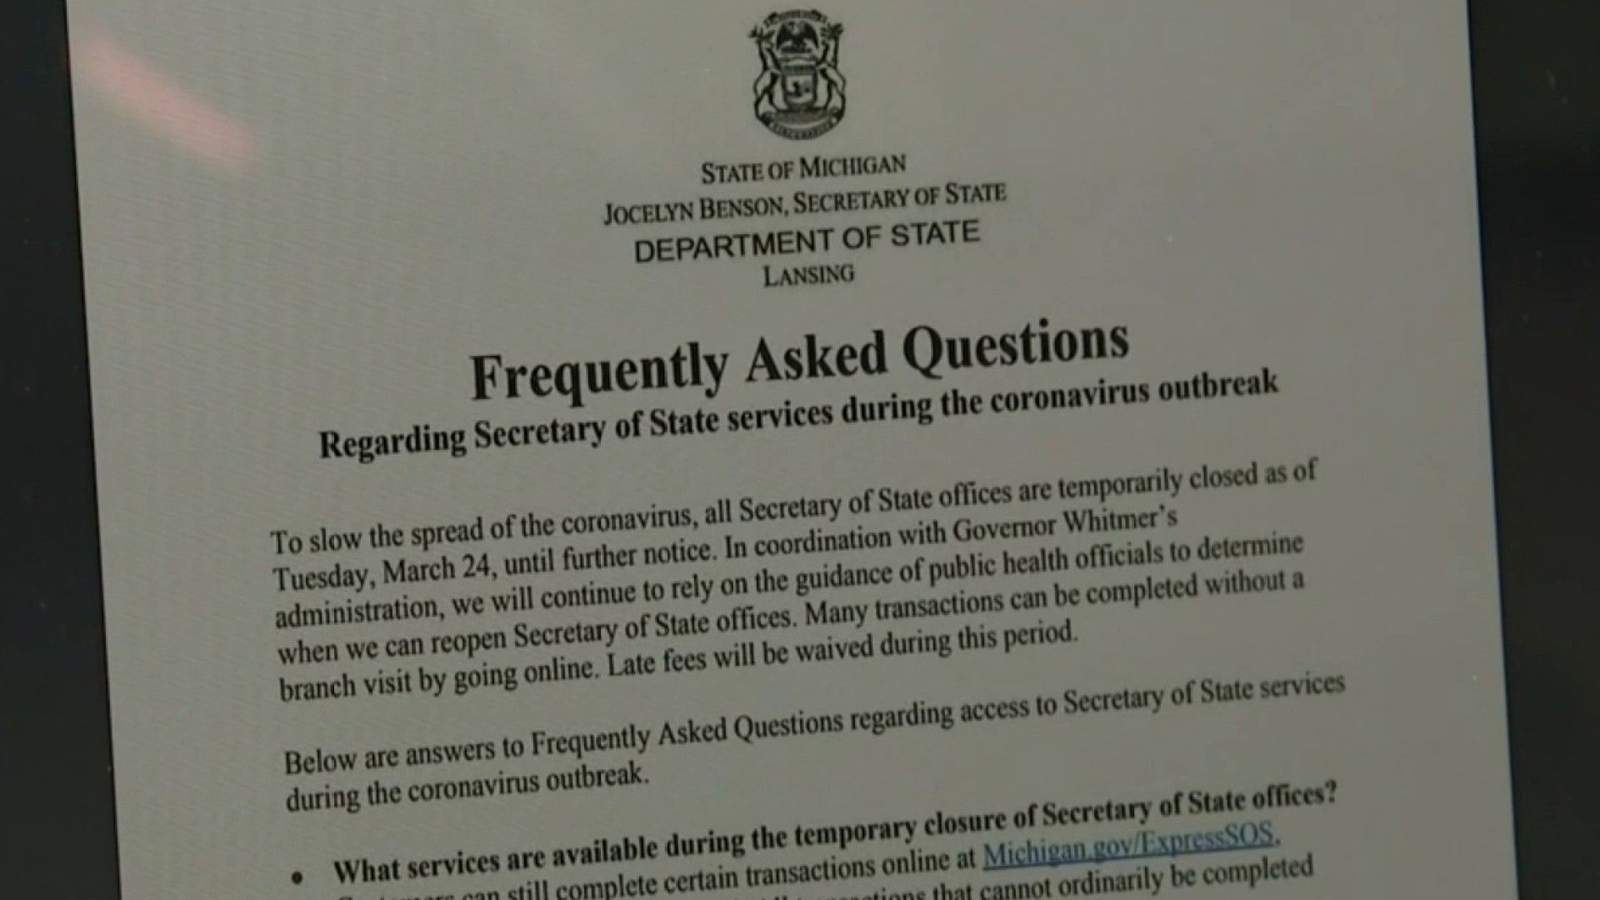 Coronavirus in Michigan: What to do while Secretary of State branch offices are closed